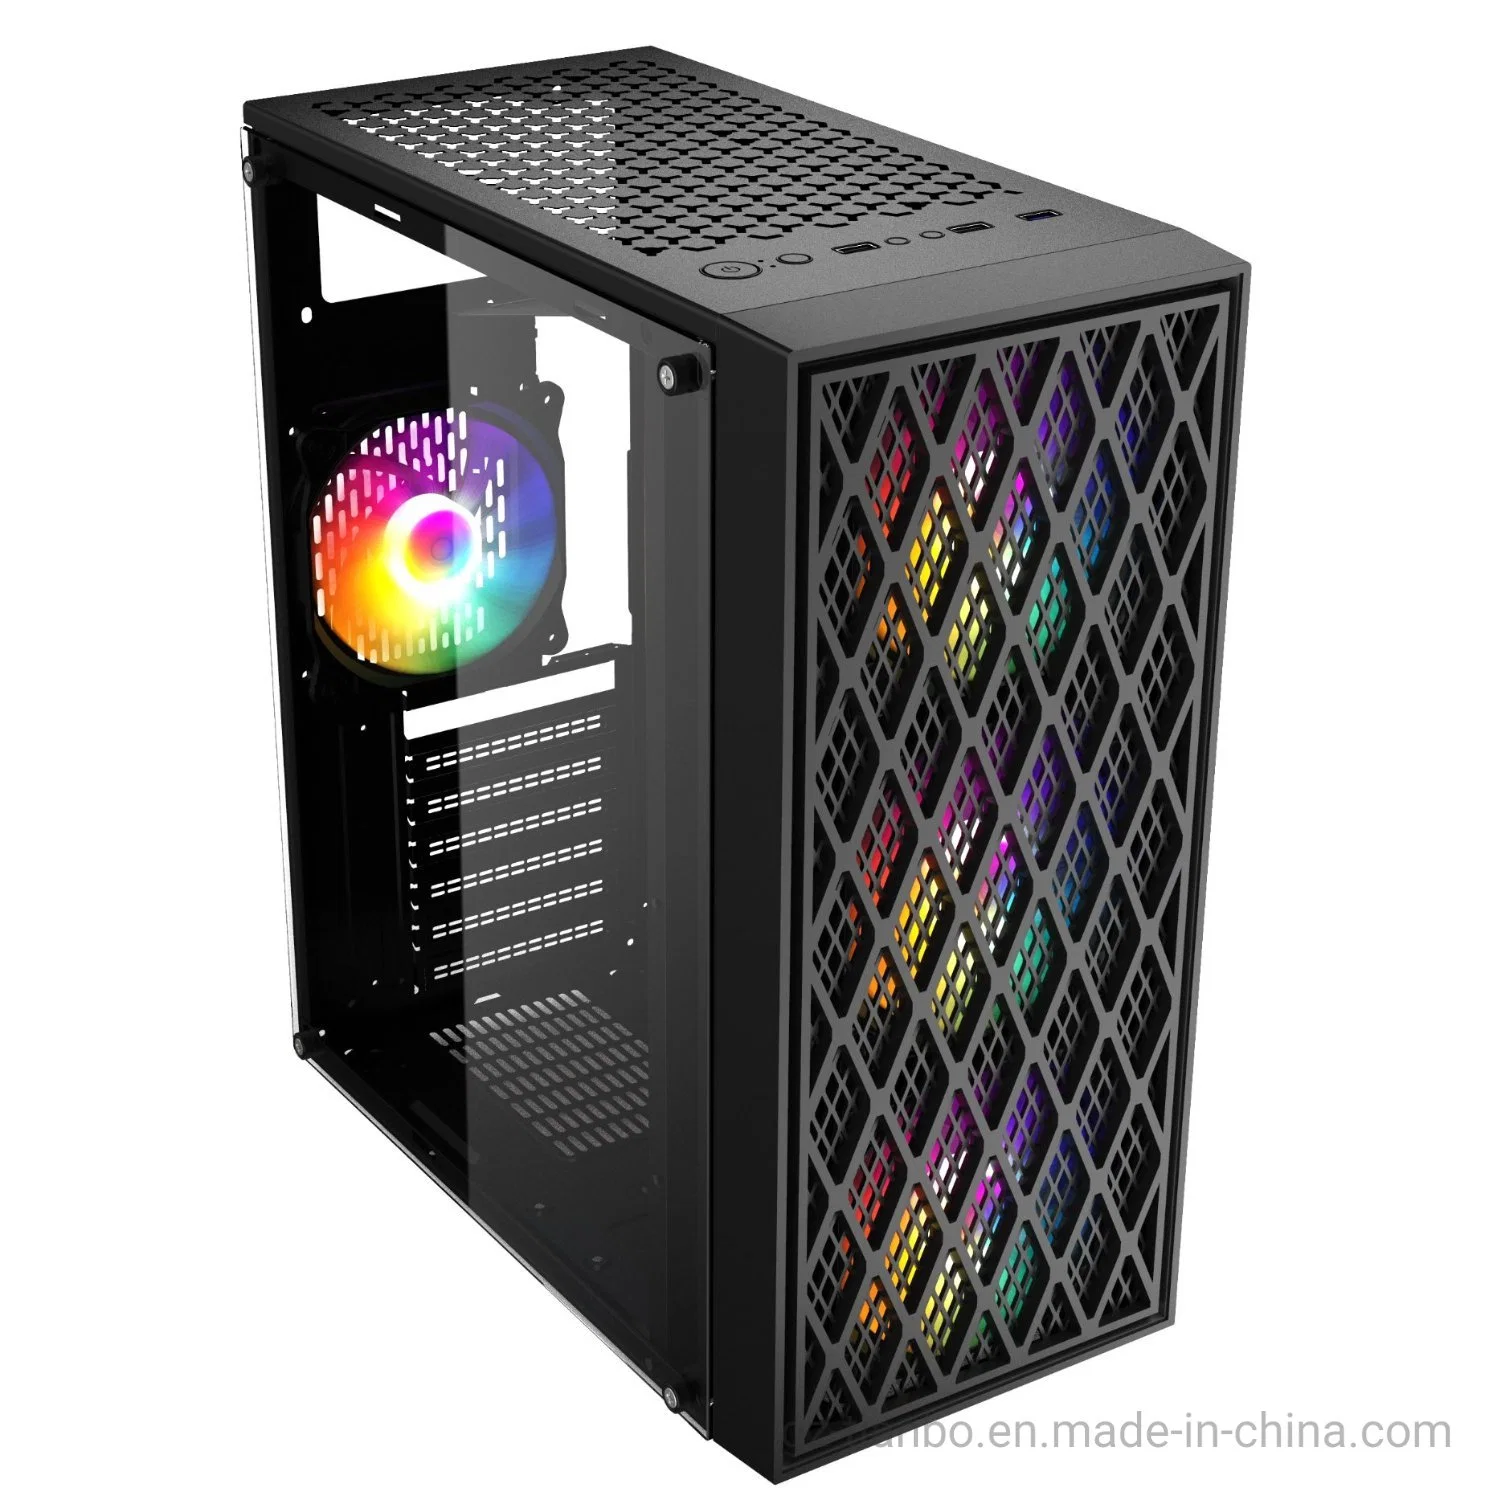 ATX Computer Tower PC Gaming Case with Mesh